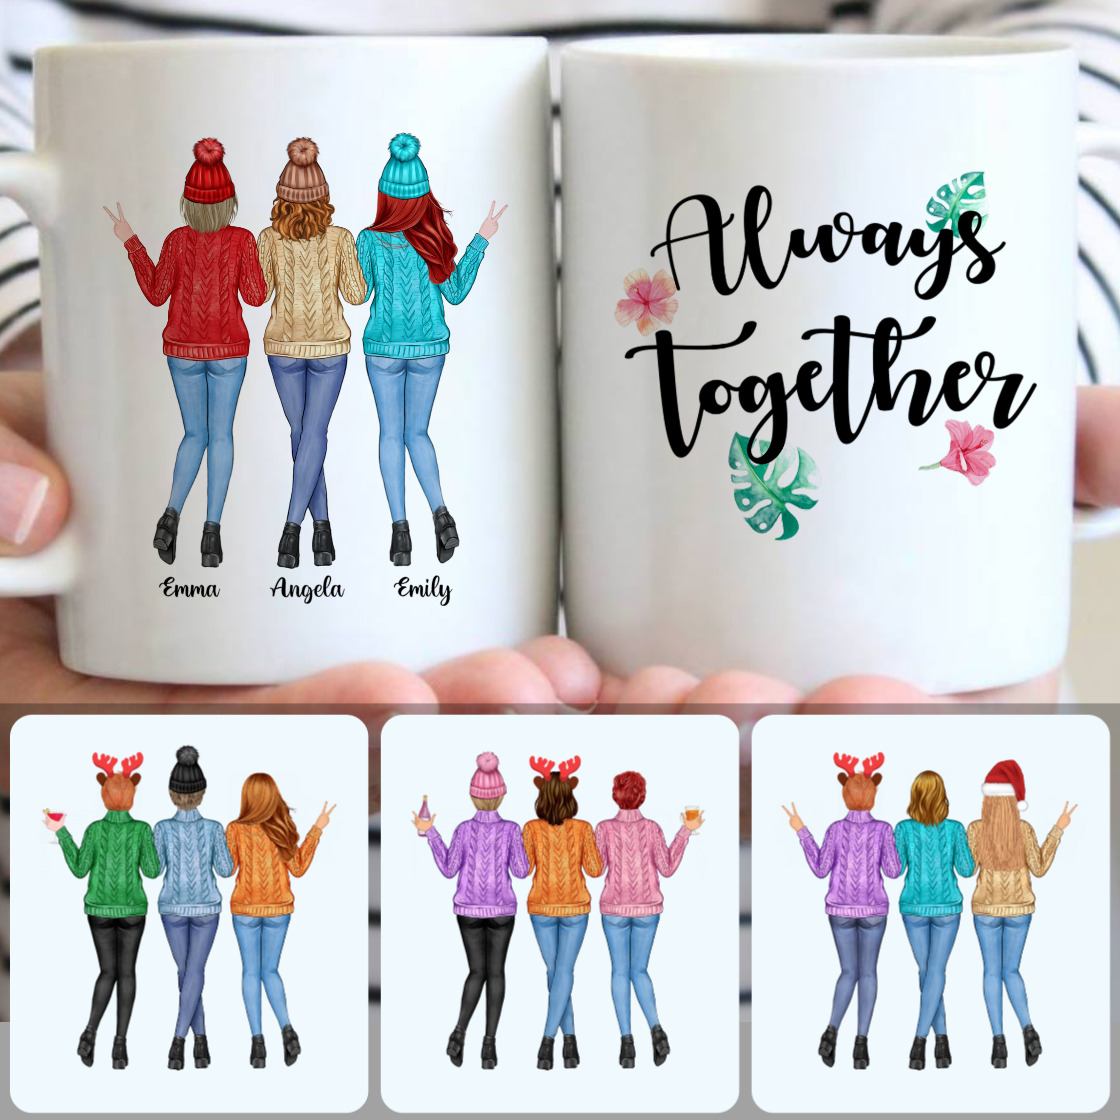 Personalized Mug, Special Christmas Gifts, 3 Best Friends - Always Together Customized Coffee Mug With Names